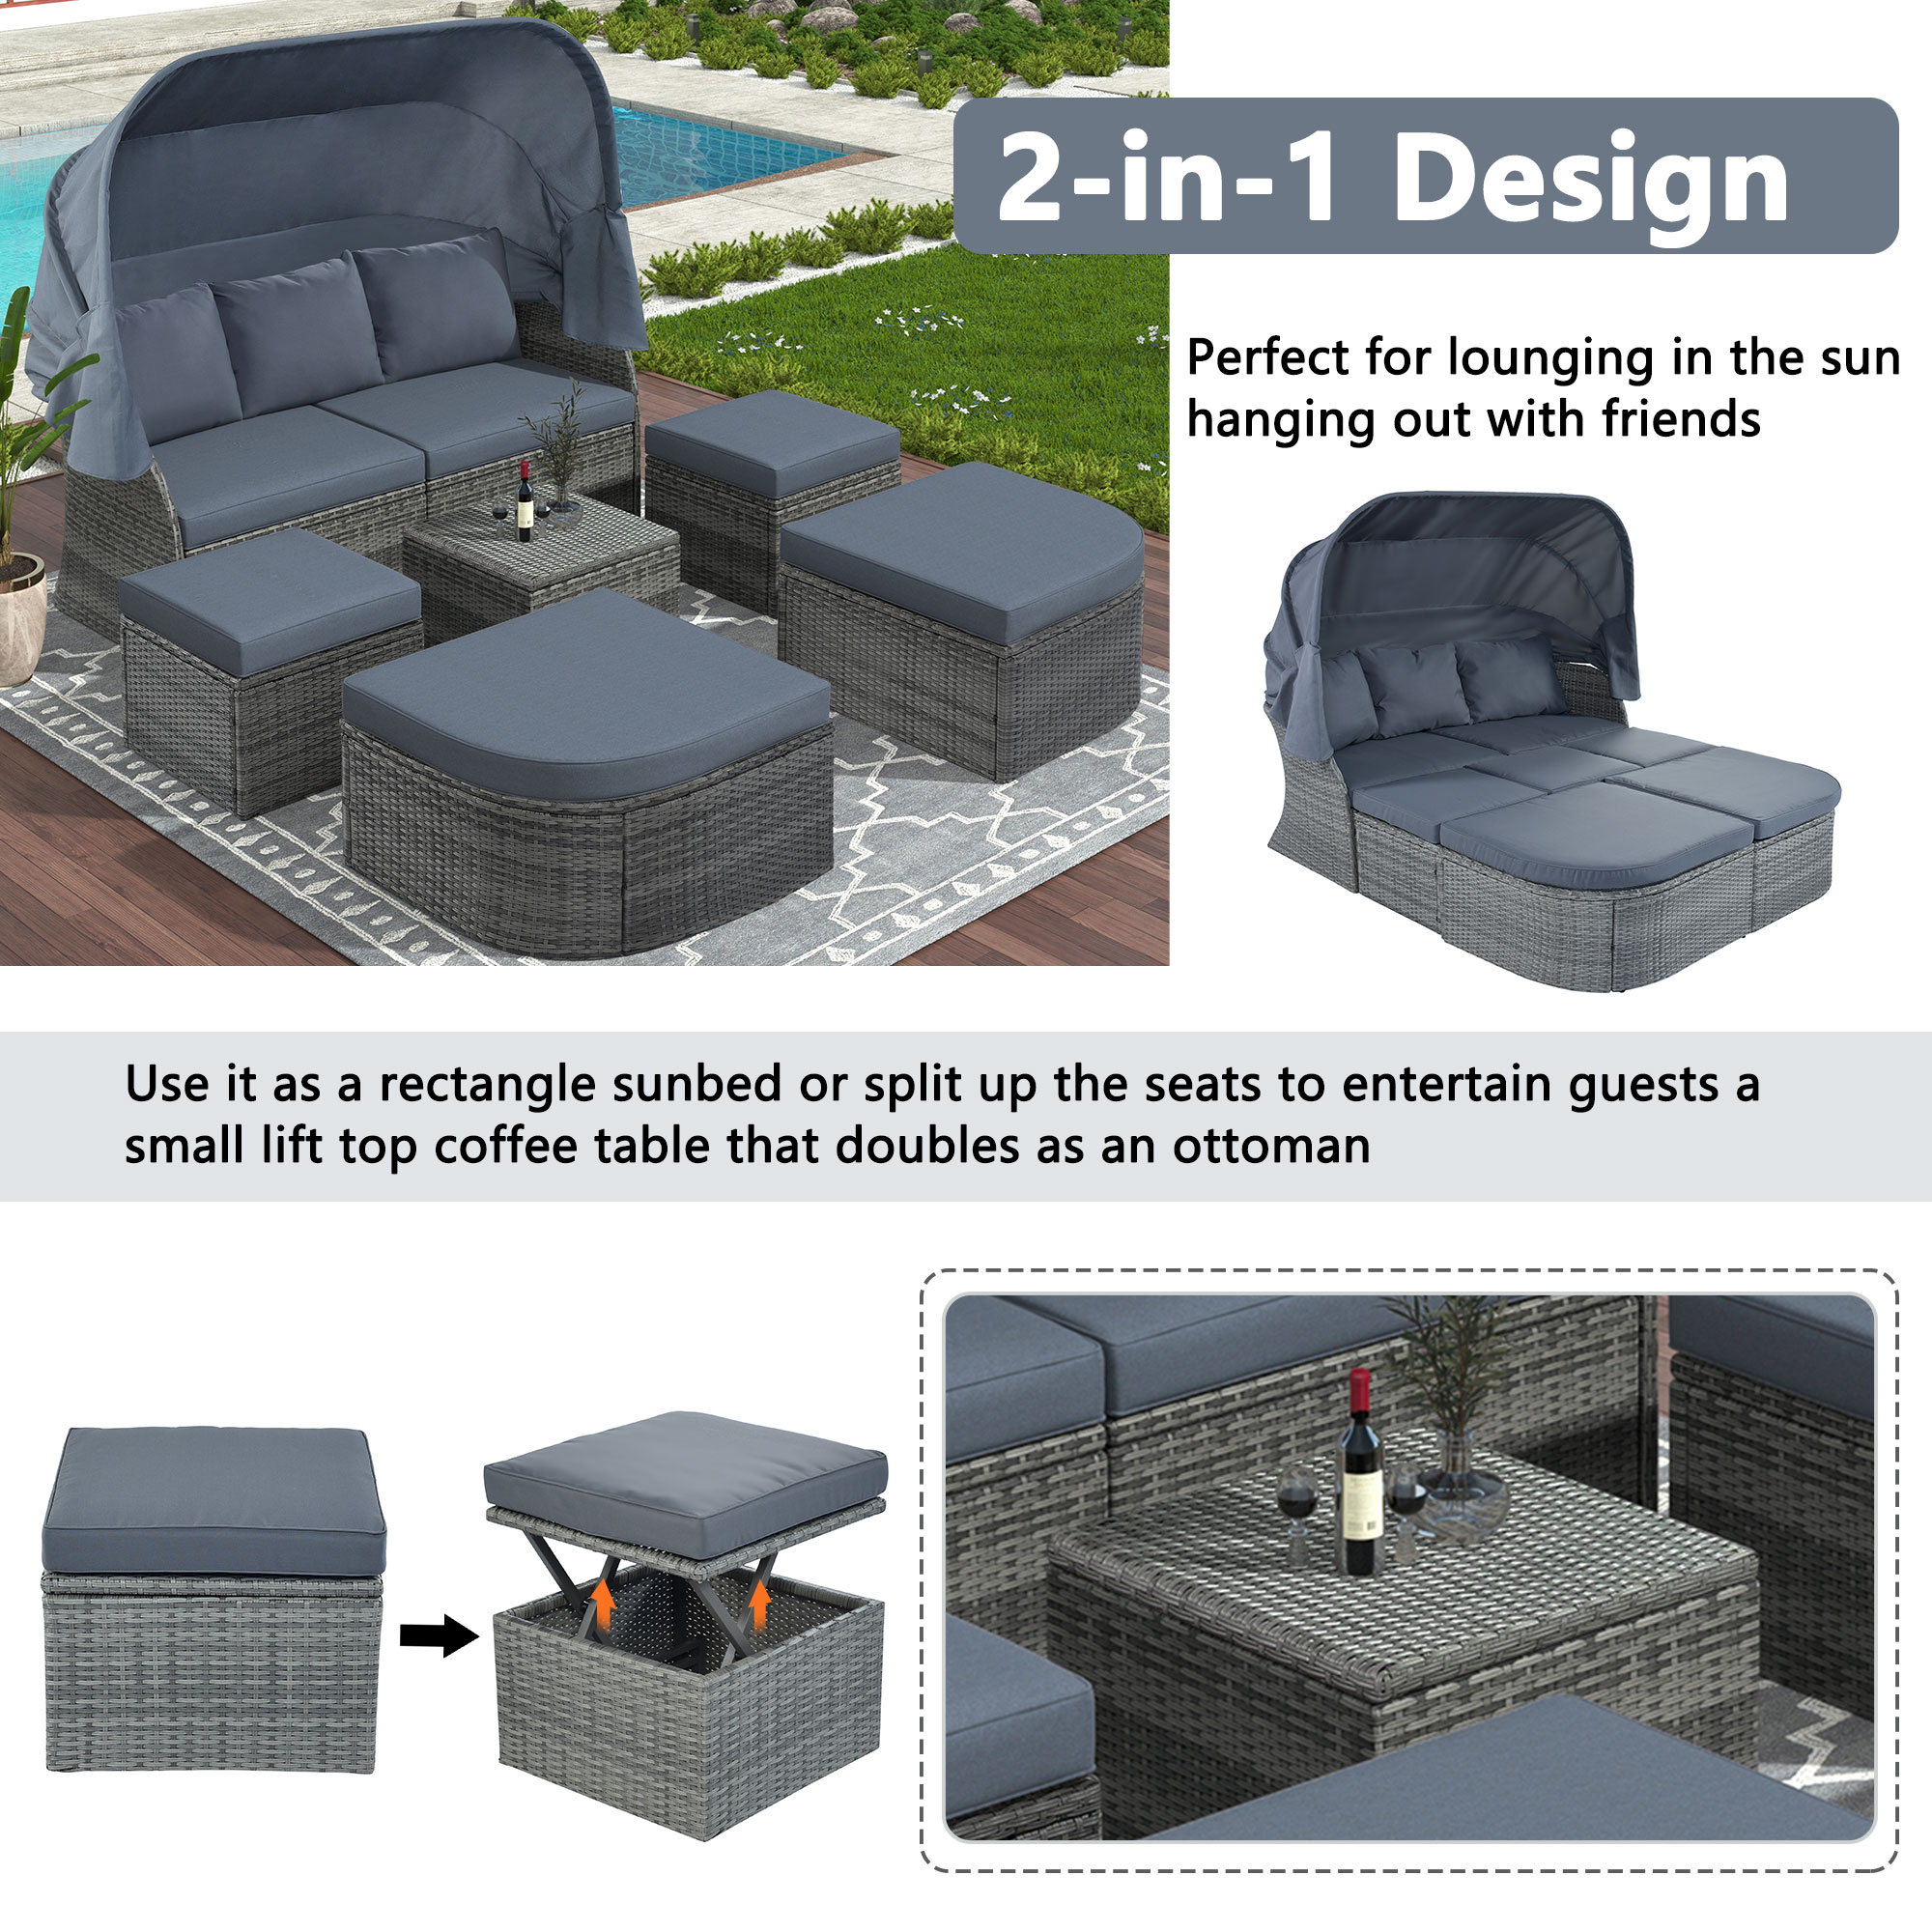 SYNGAR Outdoor Daybed with Canopy, 6 Piece PE Wicker Sectional Furniture Set with Ottomans, Rattan Conversation Sofa Set, Patio Sunbed with Cushions, for Backyard, Pool, Garden, Gray, D6940 - image 4 of 12